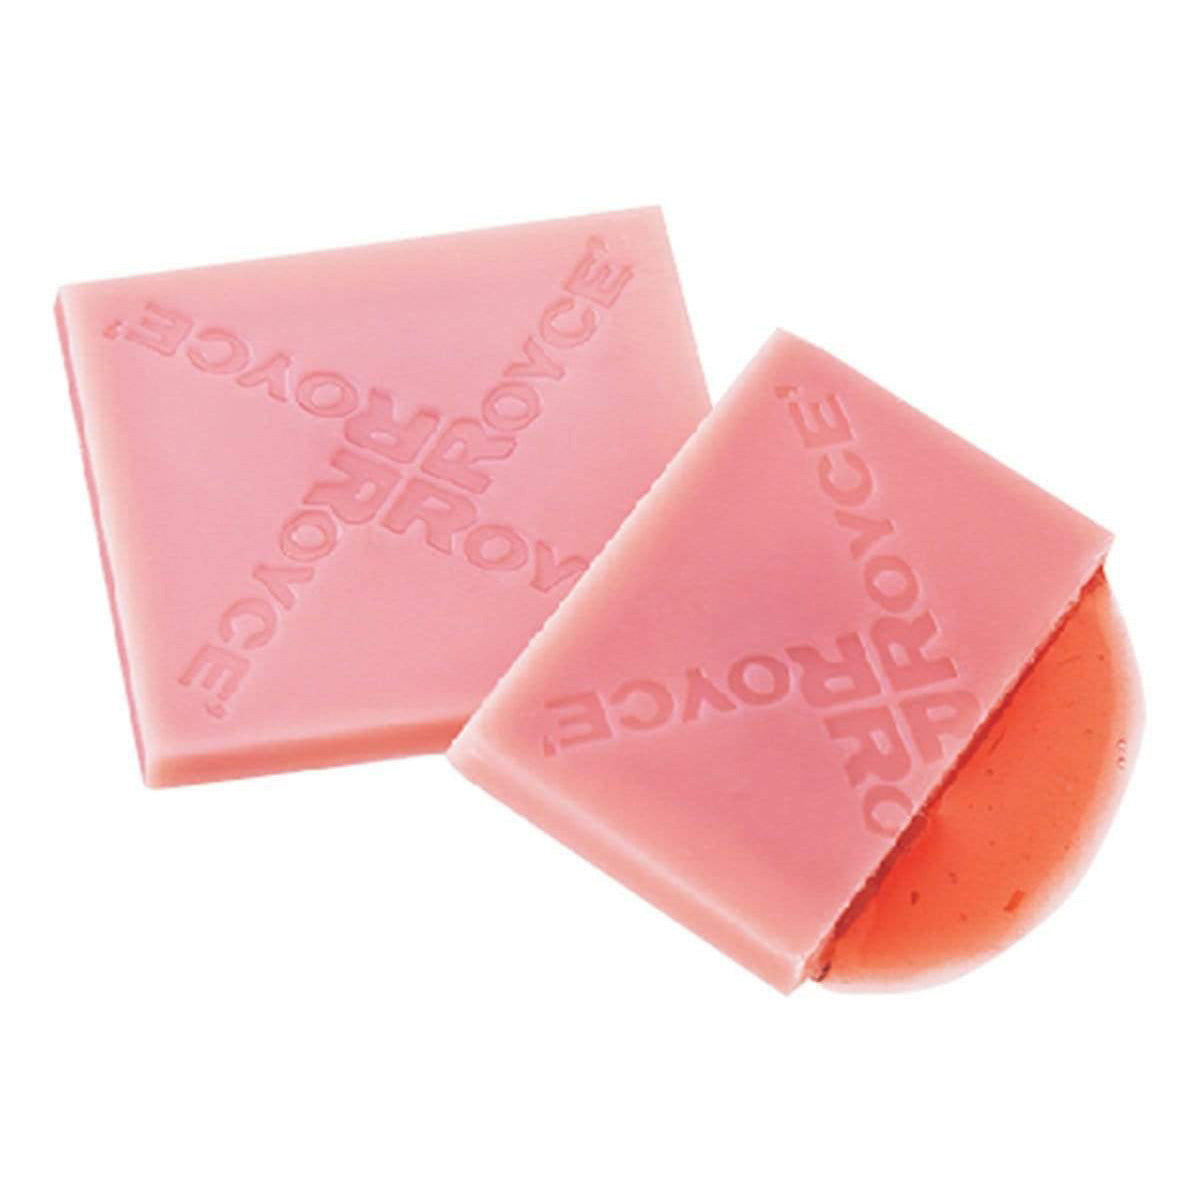 ROYCE' Chocolate - Prafeuille Chocolat "Sakura Cube" - Image shows pink chocolate squares filled with red sauce and engraved with the words "ROYCE'".